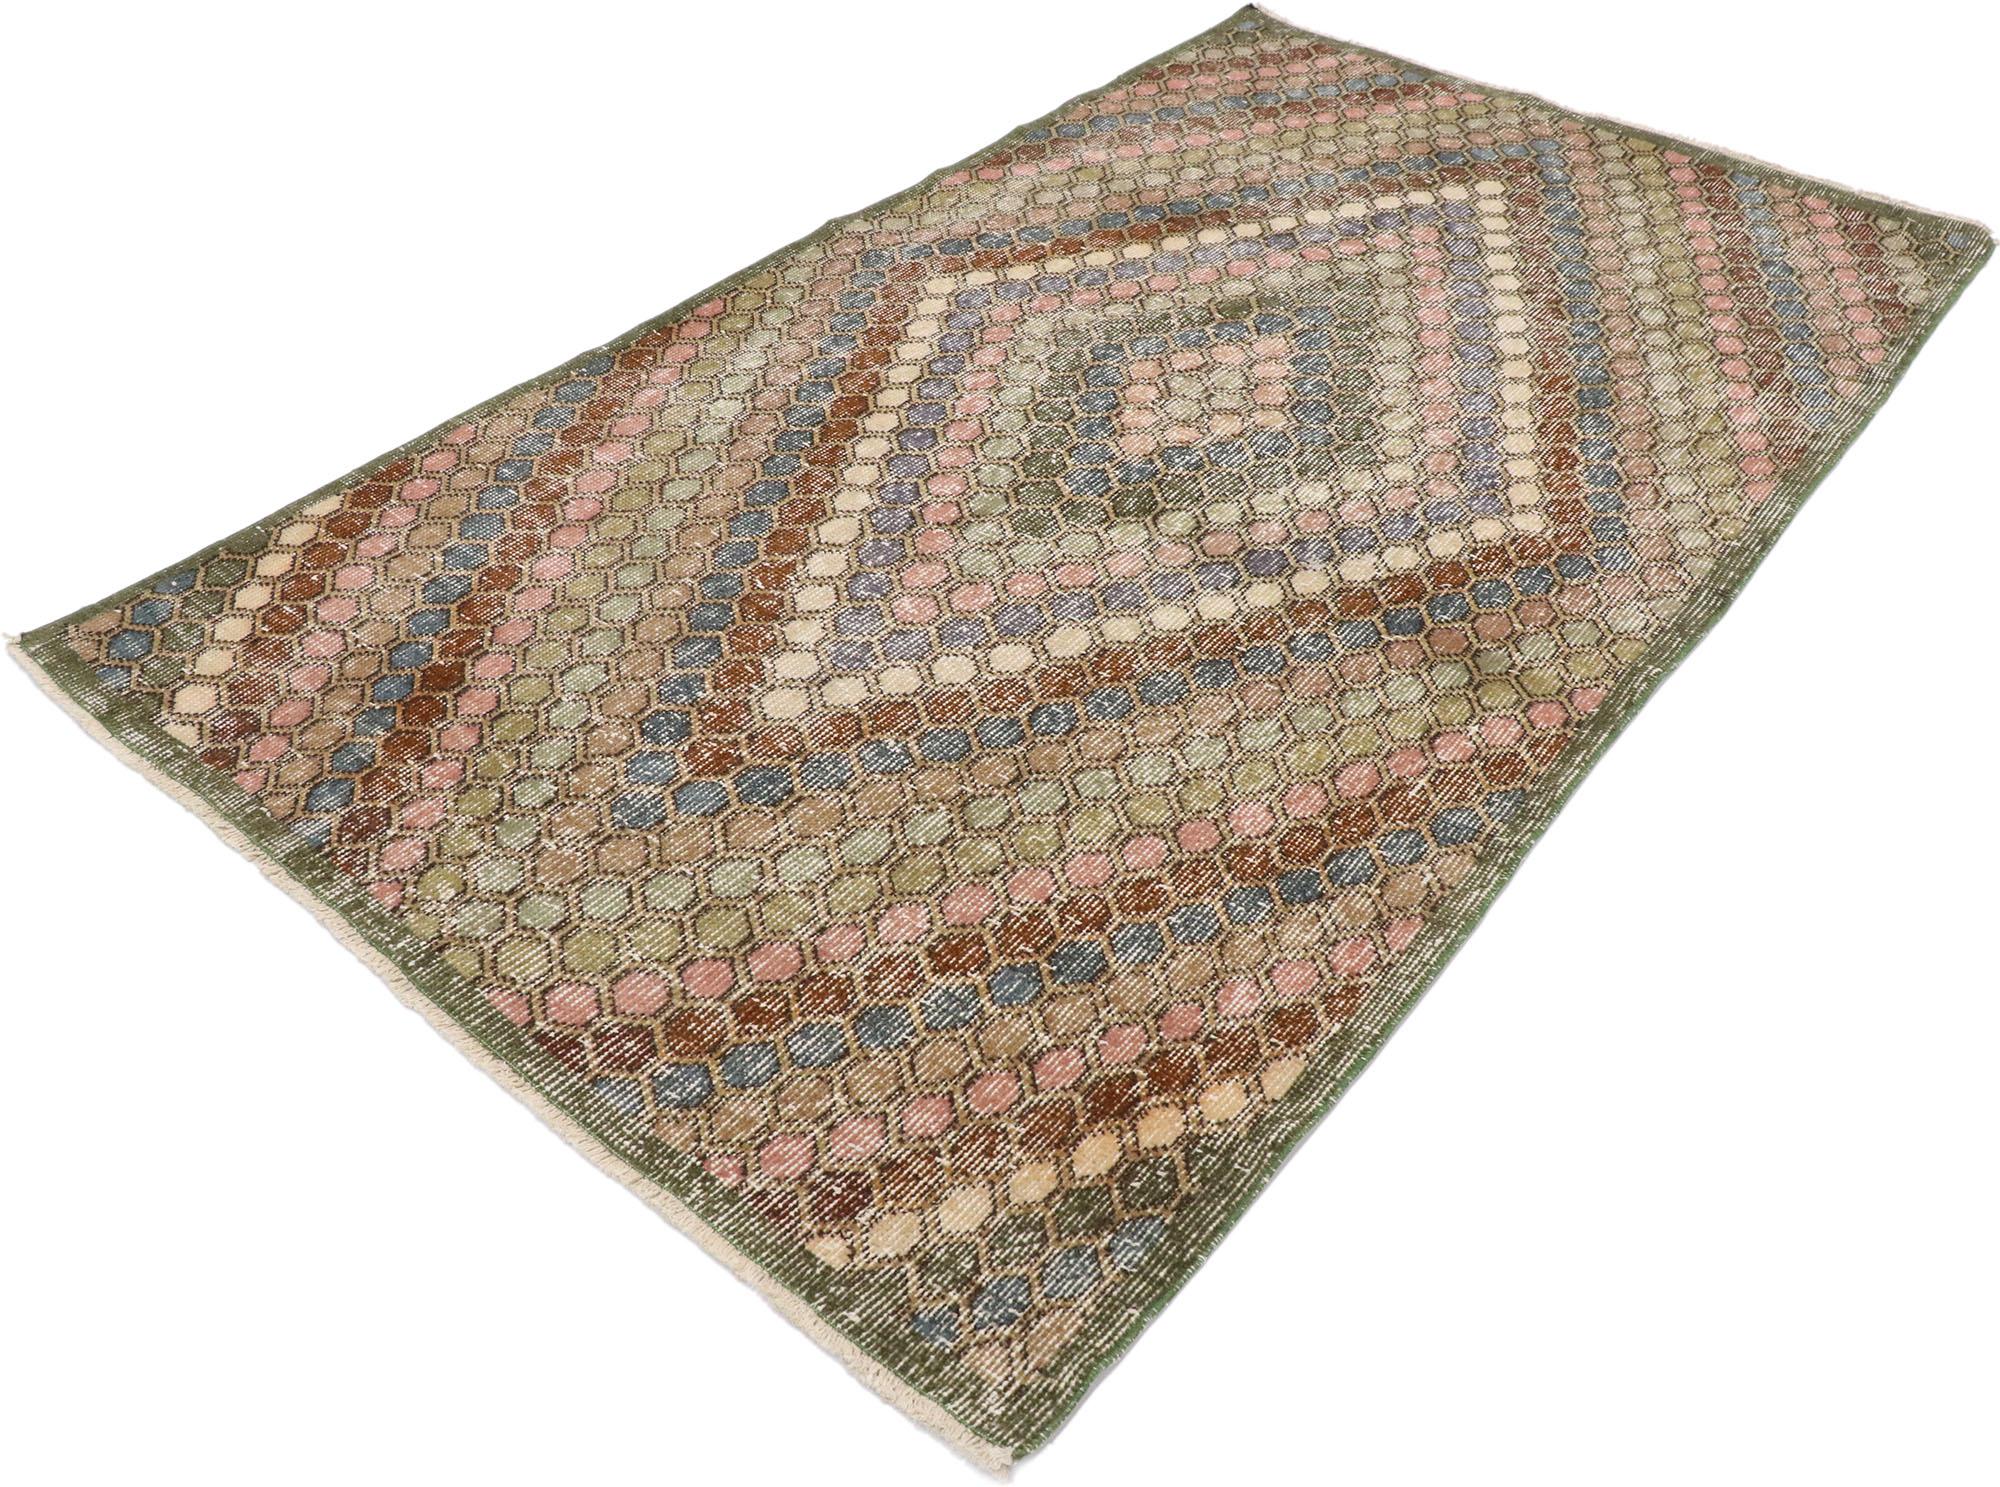 53355, distressed vintage Turkish Sivas rug with Rustic Bohemian style. This hand knotted wool distressed vintage Turkish Sivas rug features an all-over hexagonal lattice pattern. A simple neutral colored trellis spreads across the piece, breaking